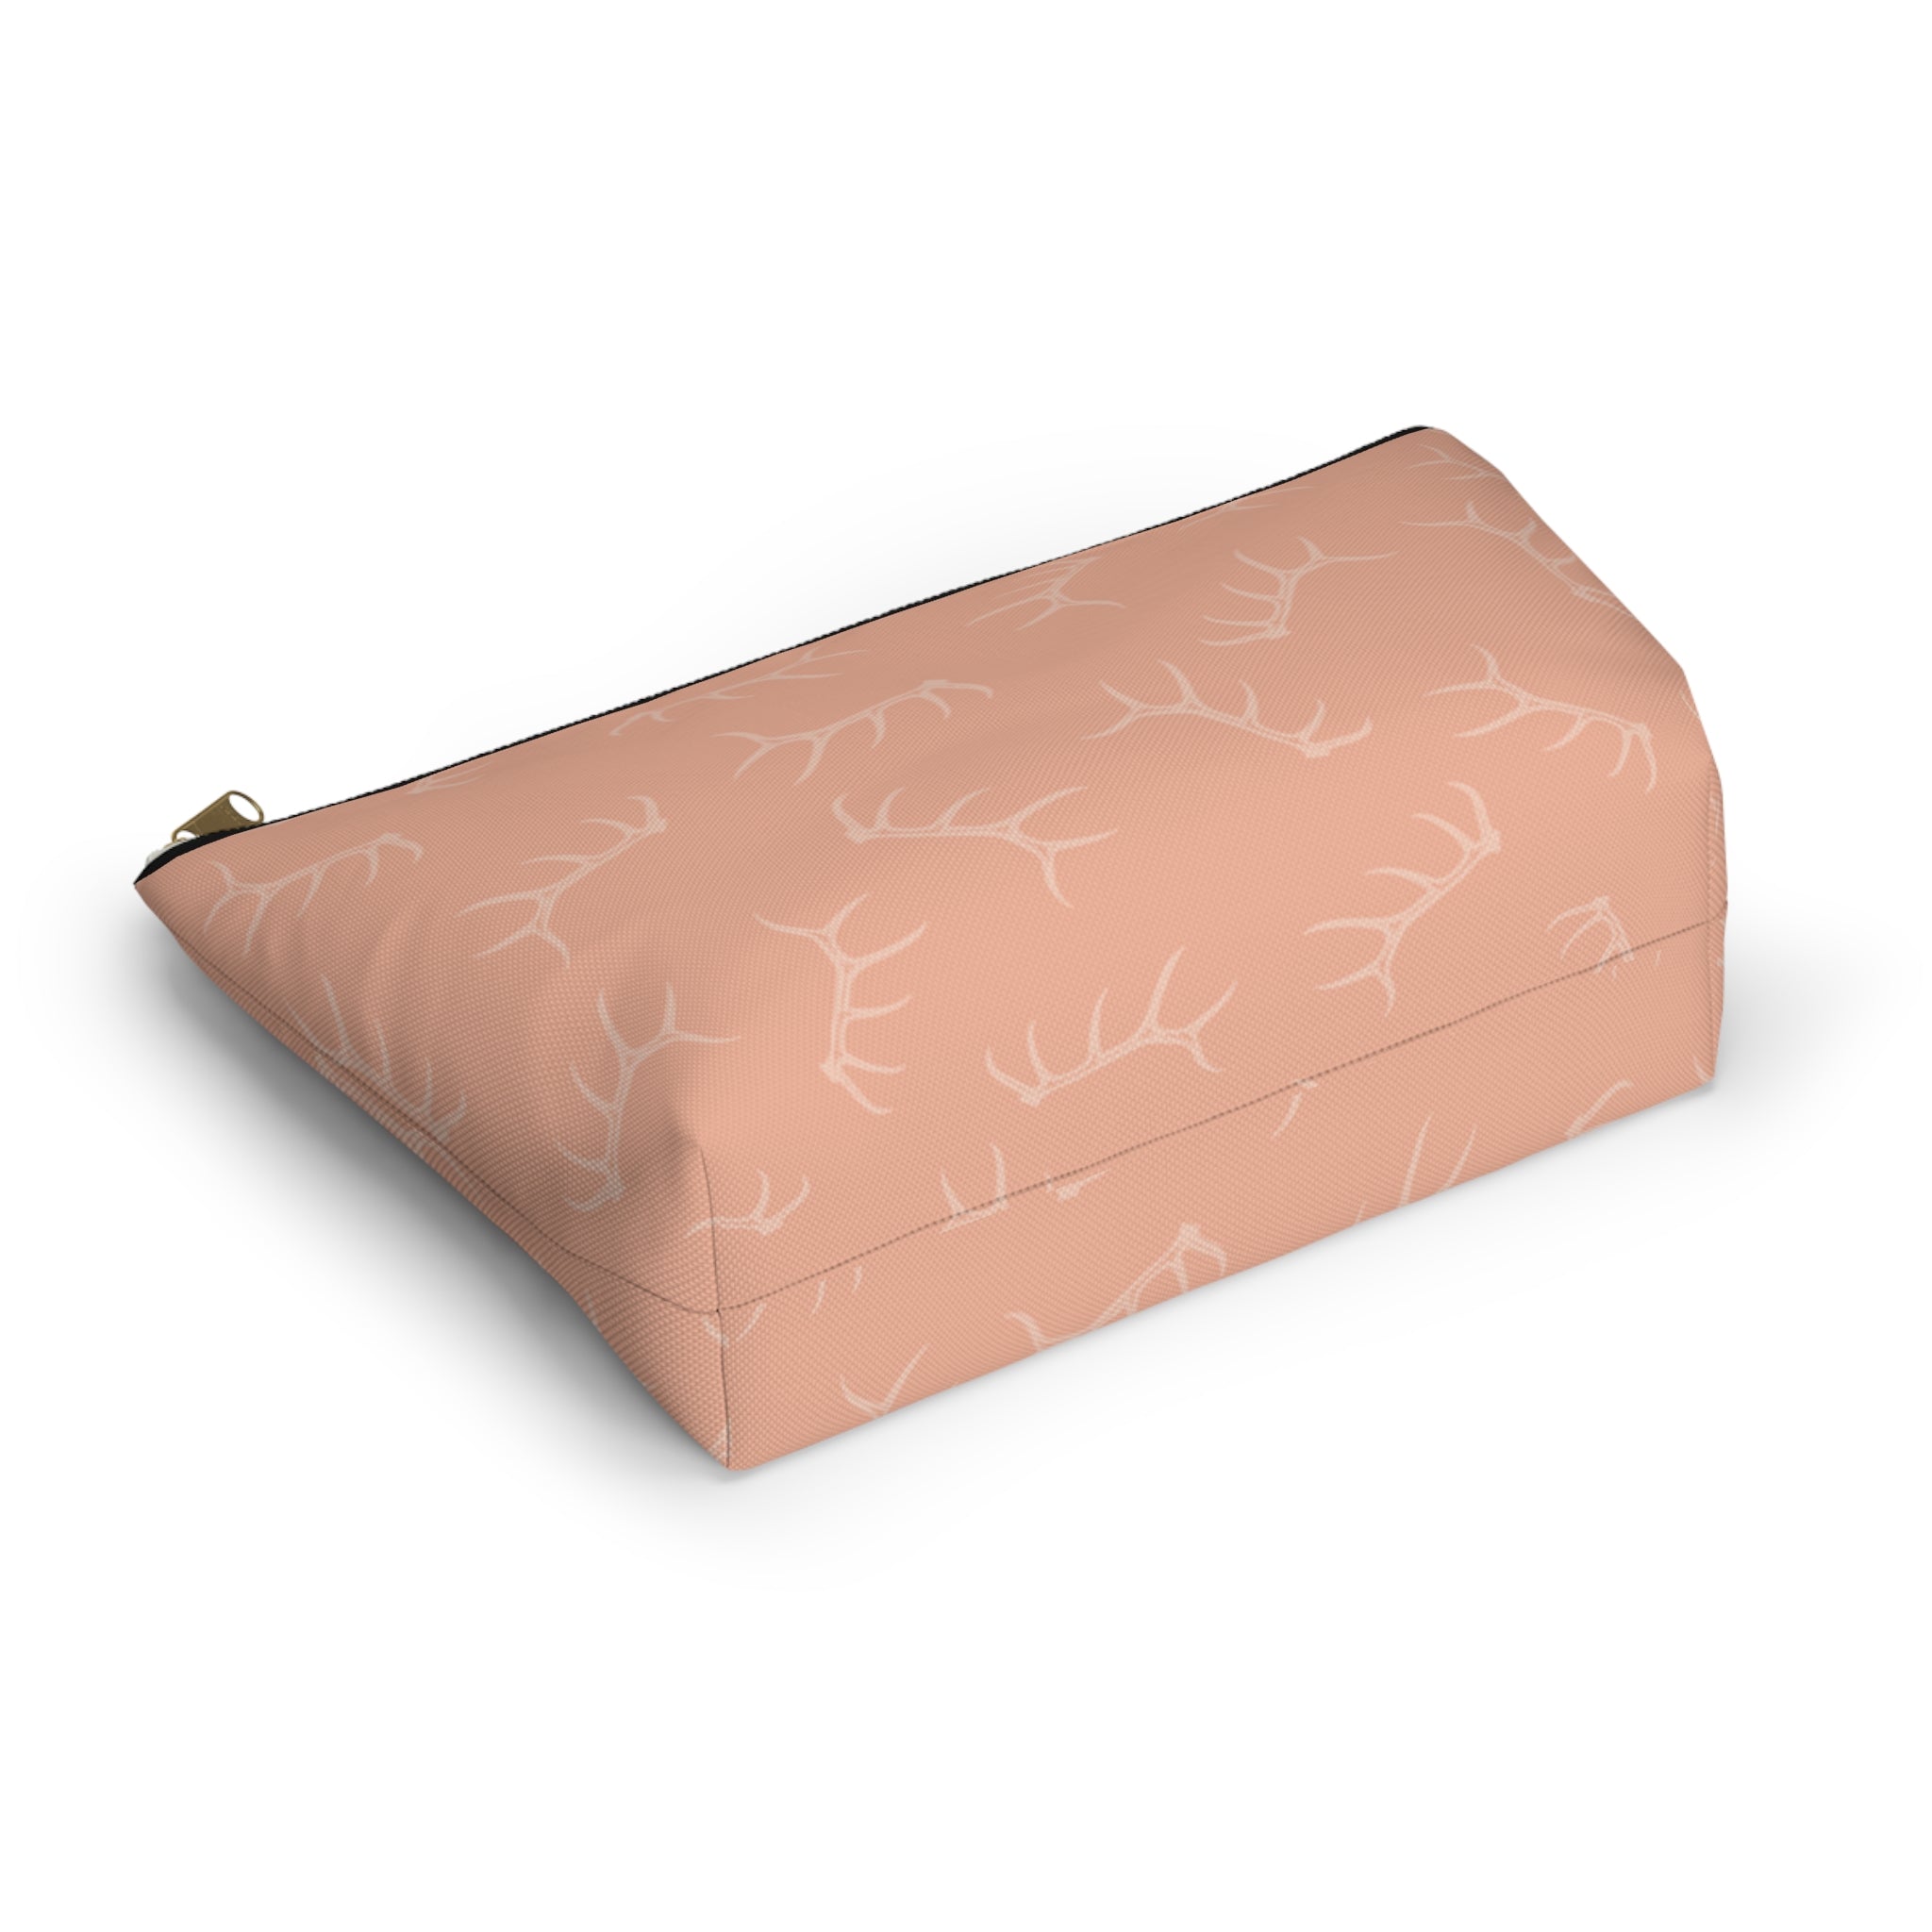 Elk Shed Pencil Pouch in Peachy Pink